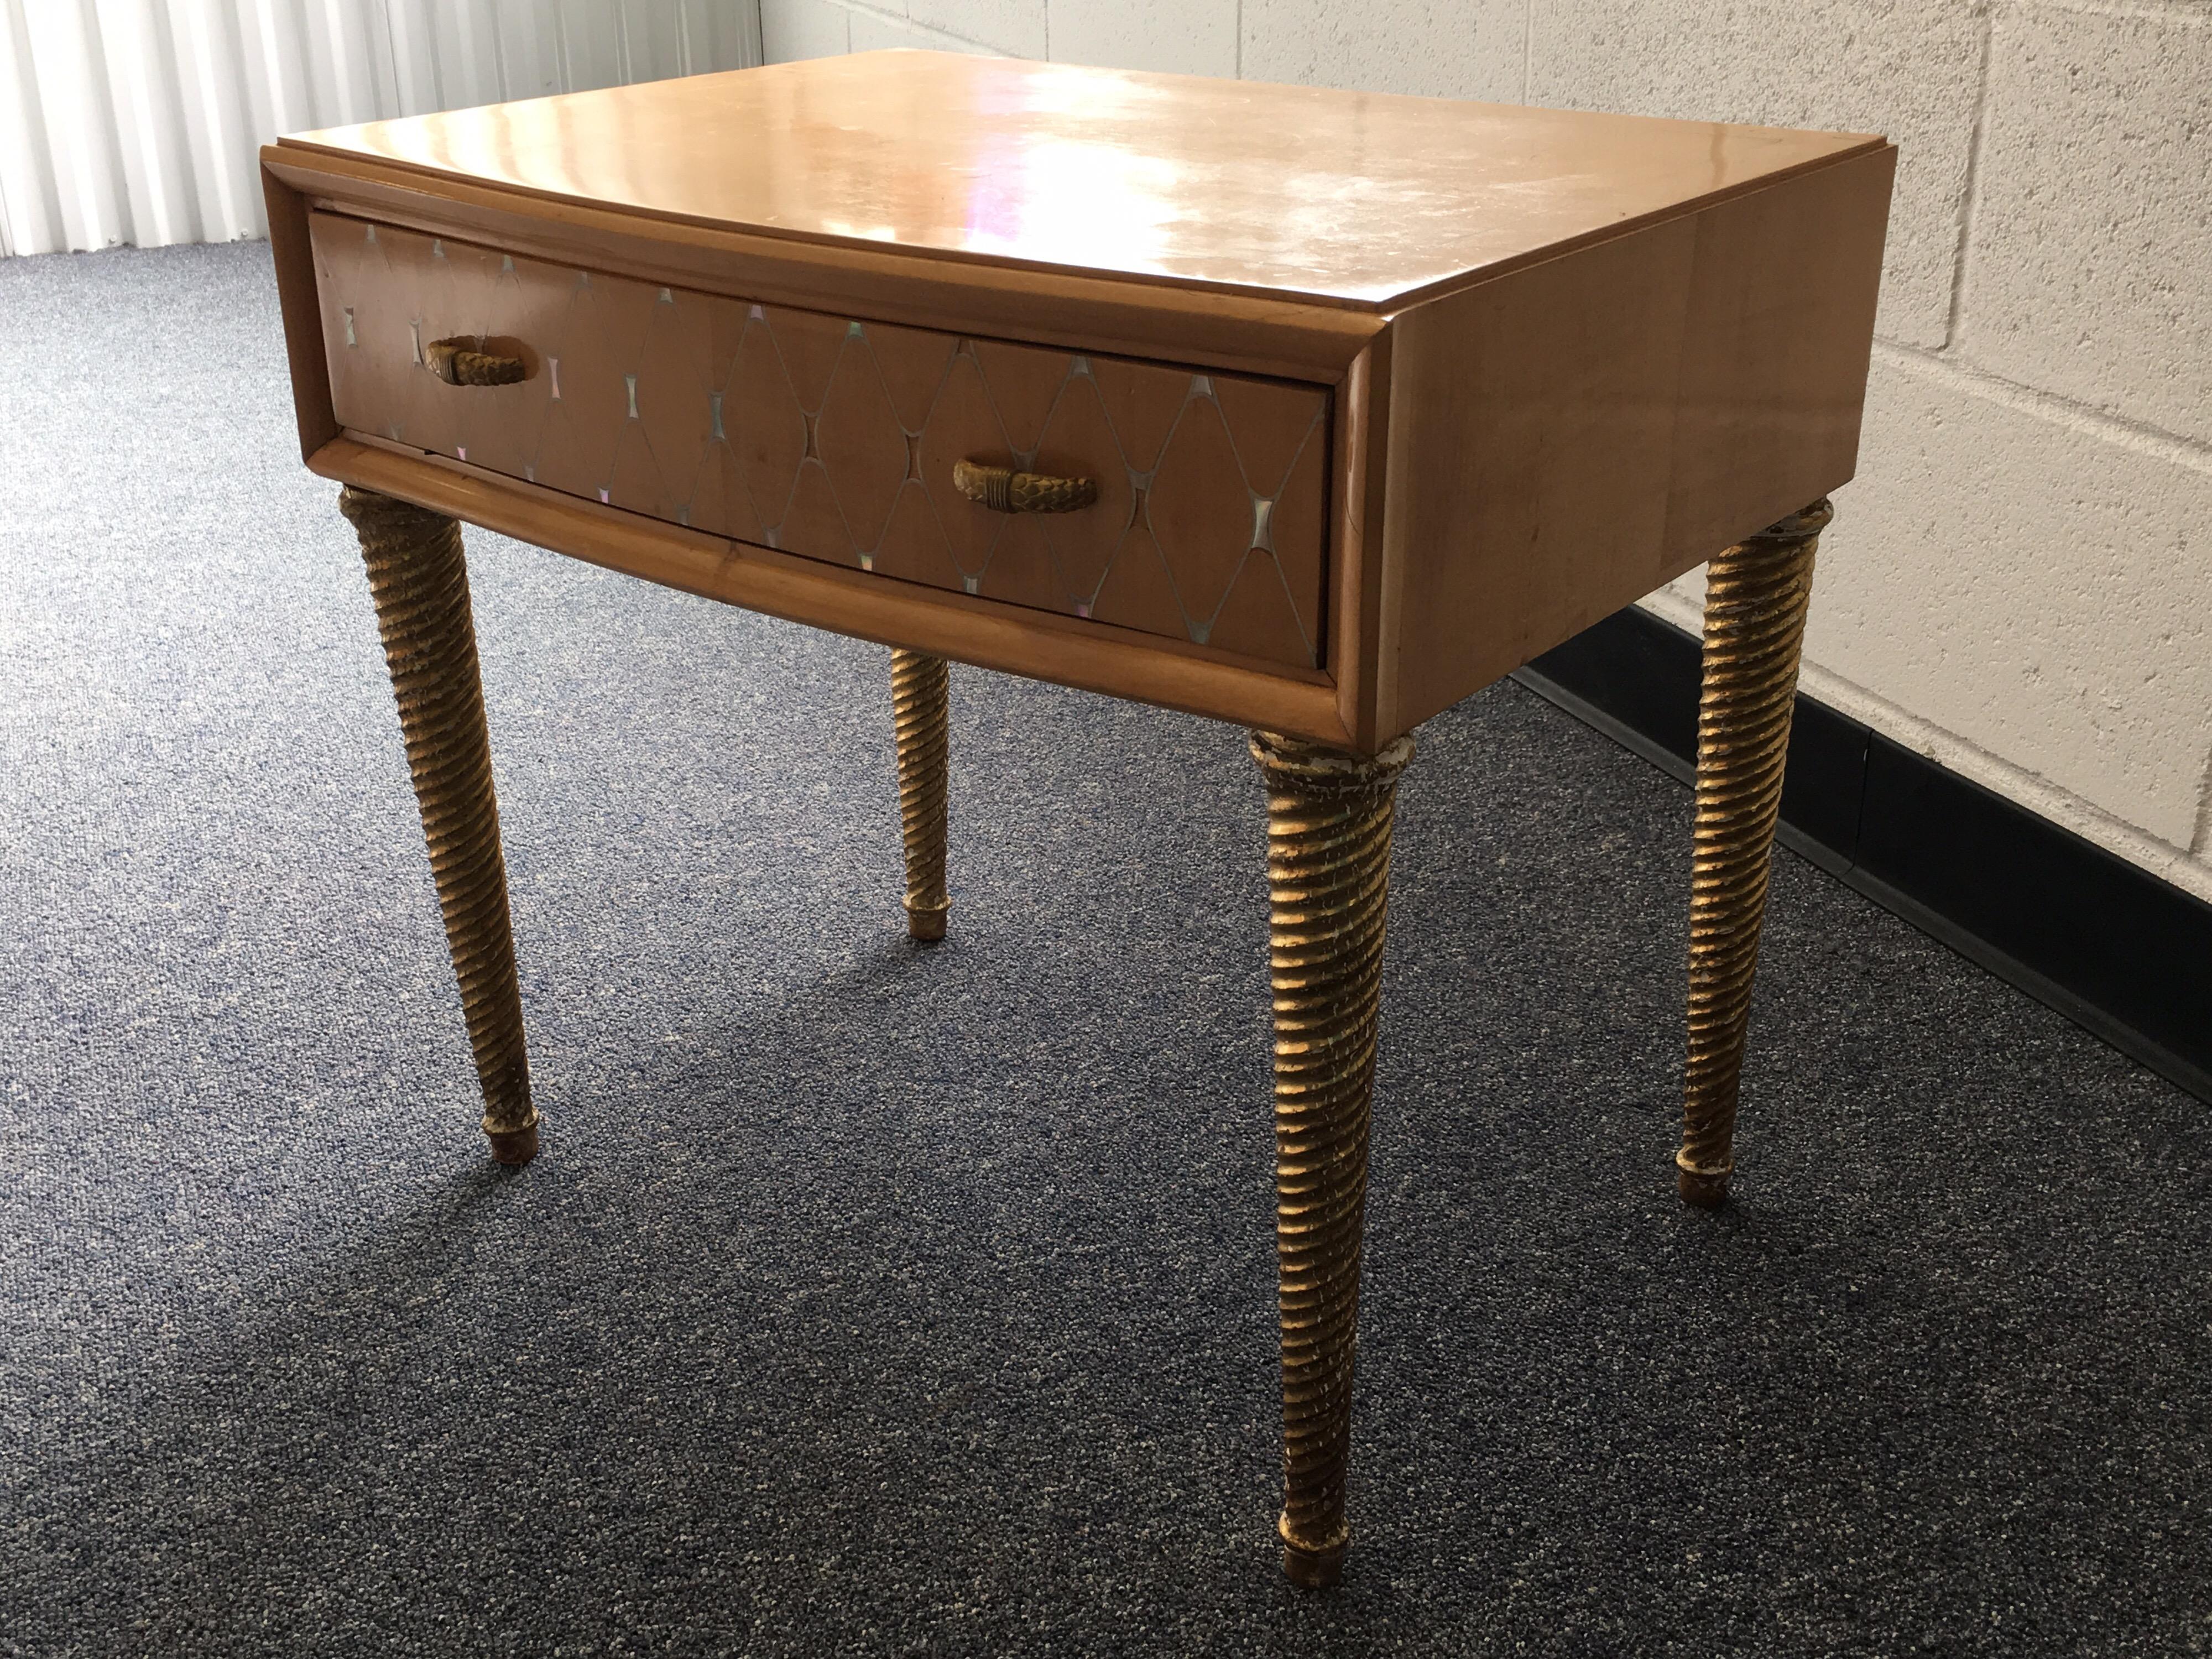 Midcentury mother of pearl and gilt bedside table. Inlay of mother of pearl in diamond pattern on the facing drawer with an inlay banding around the top. Beautiful bronze knobs. Gilded, twisted legs. Maker unknown.